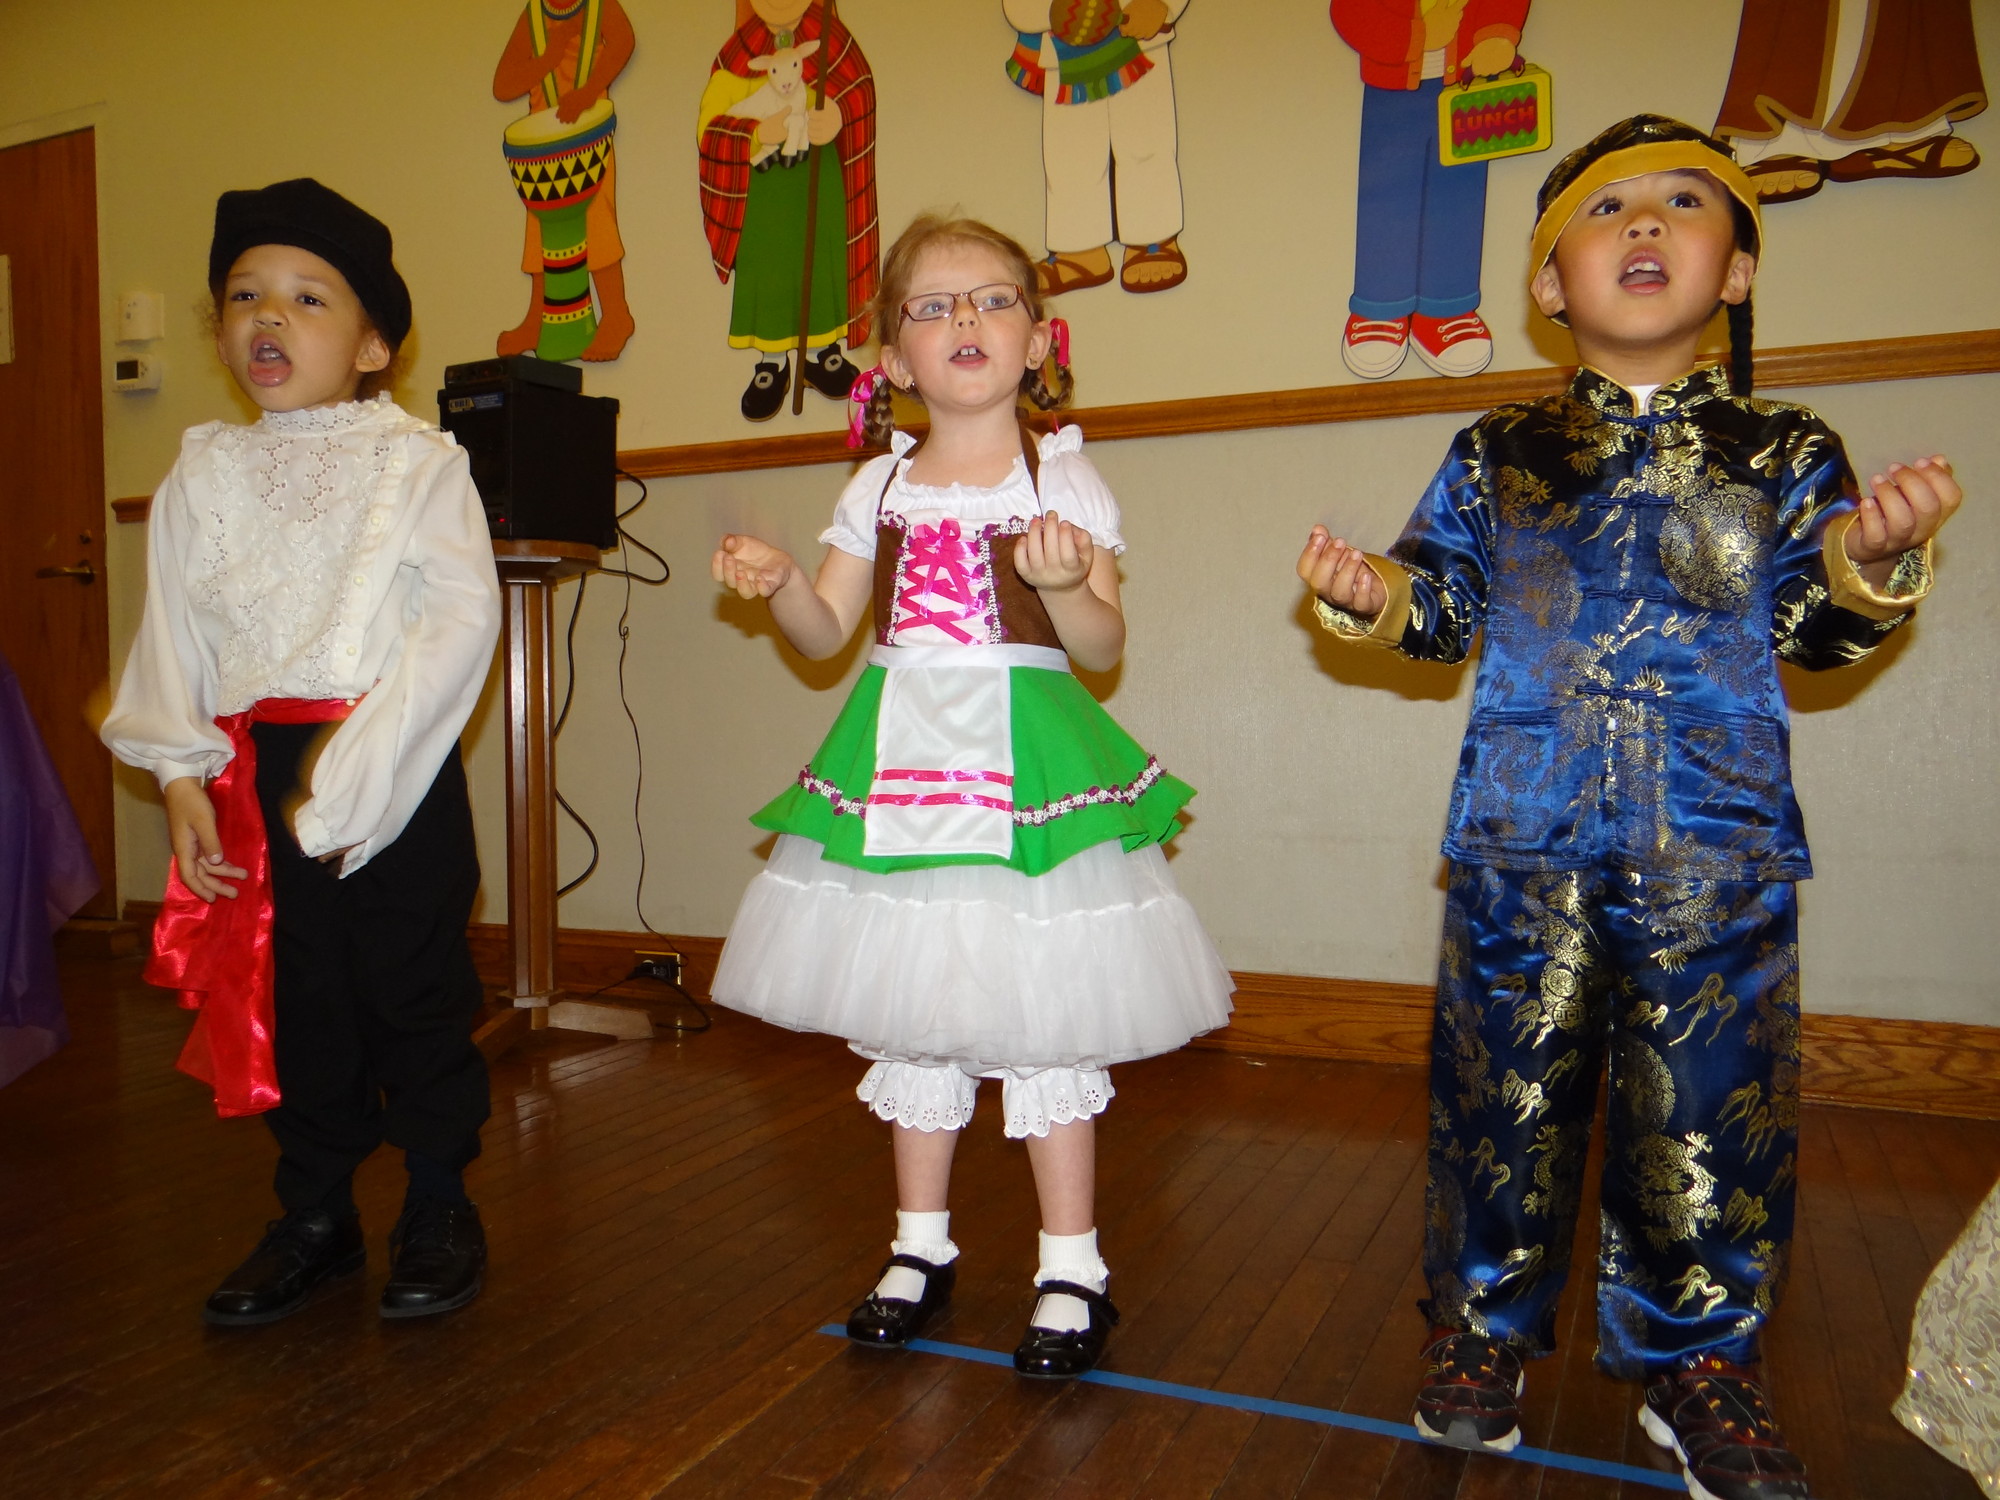 Jovan Brafman, 4, left, represented Russia, Scarlett Demmerle, 4 took on the role of Gemany, and AJ Velasco, 4, represented Japan.